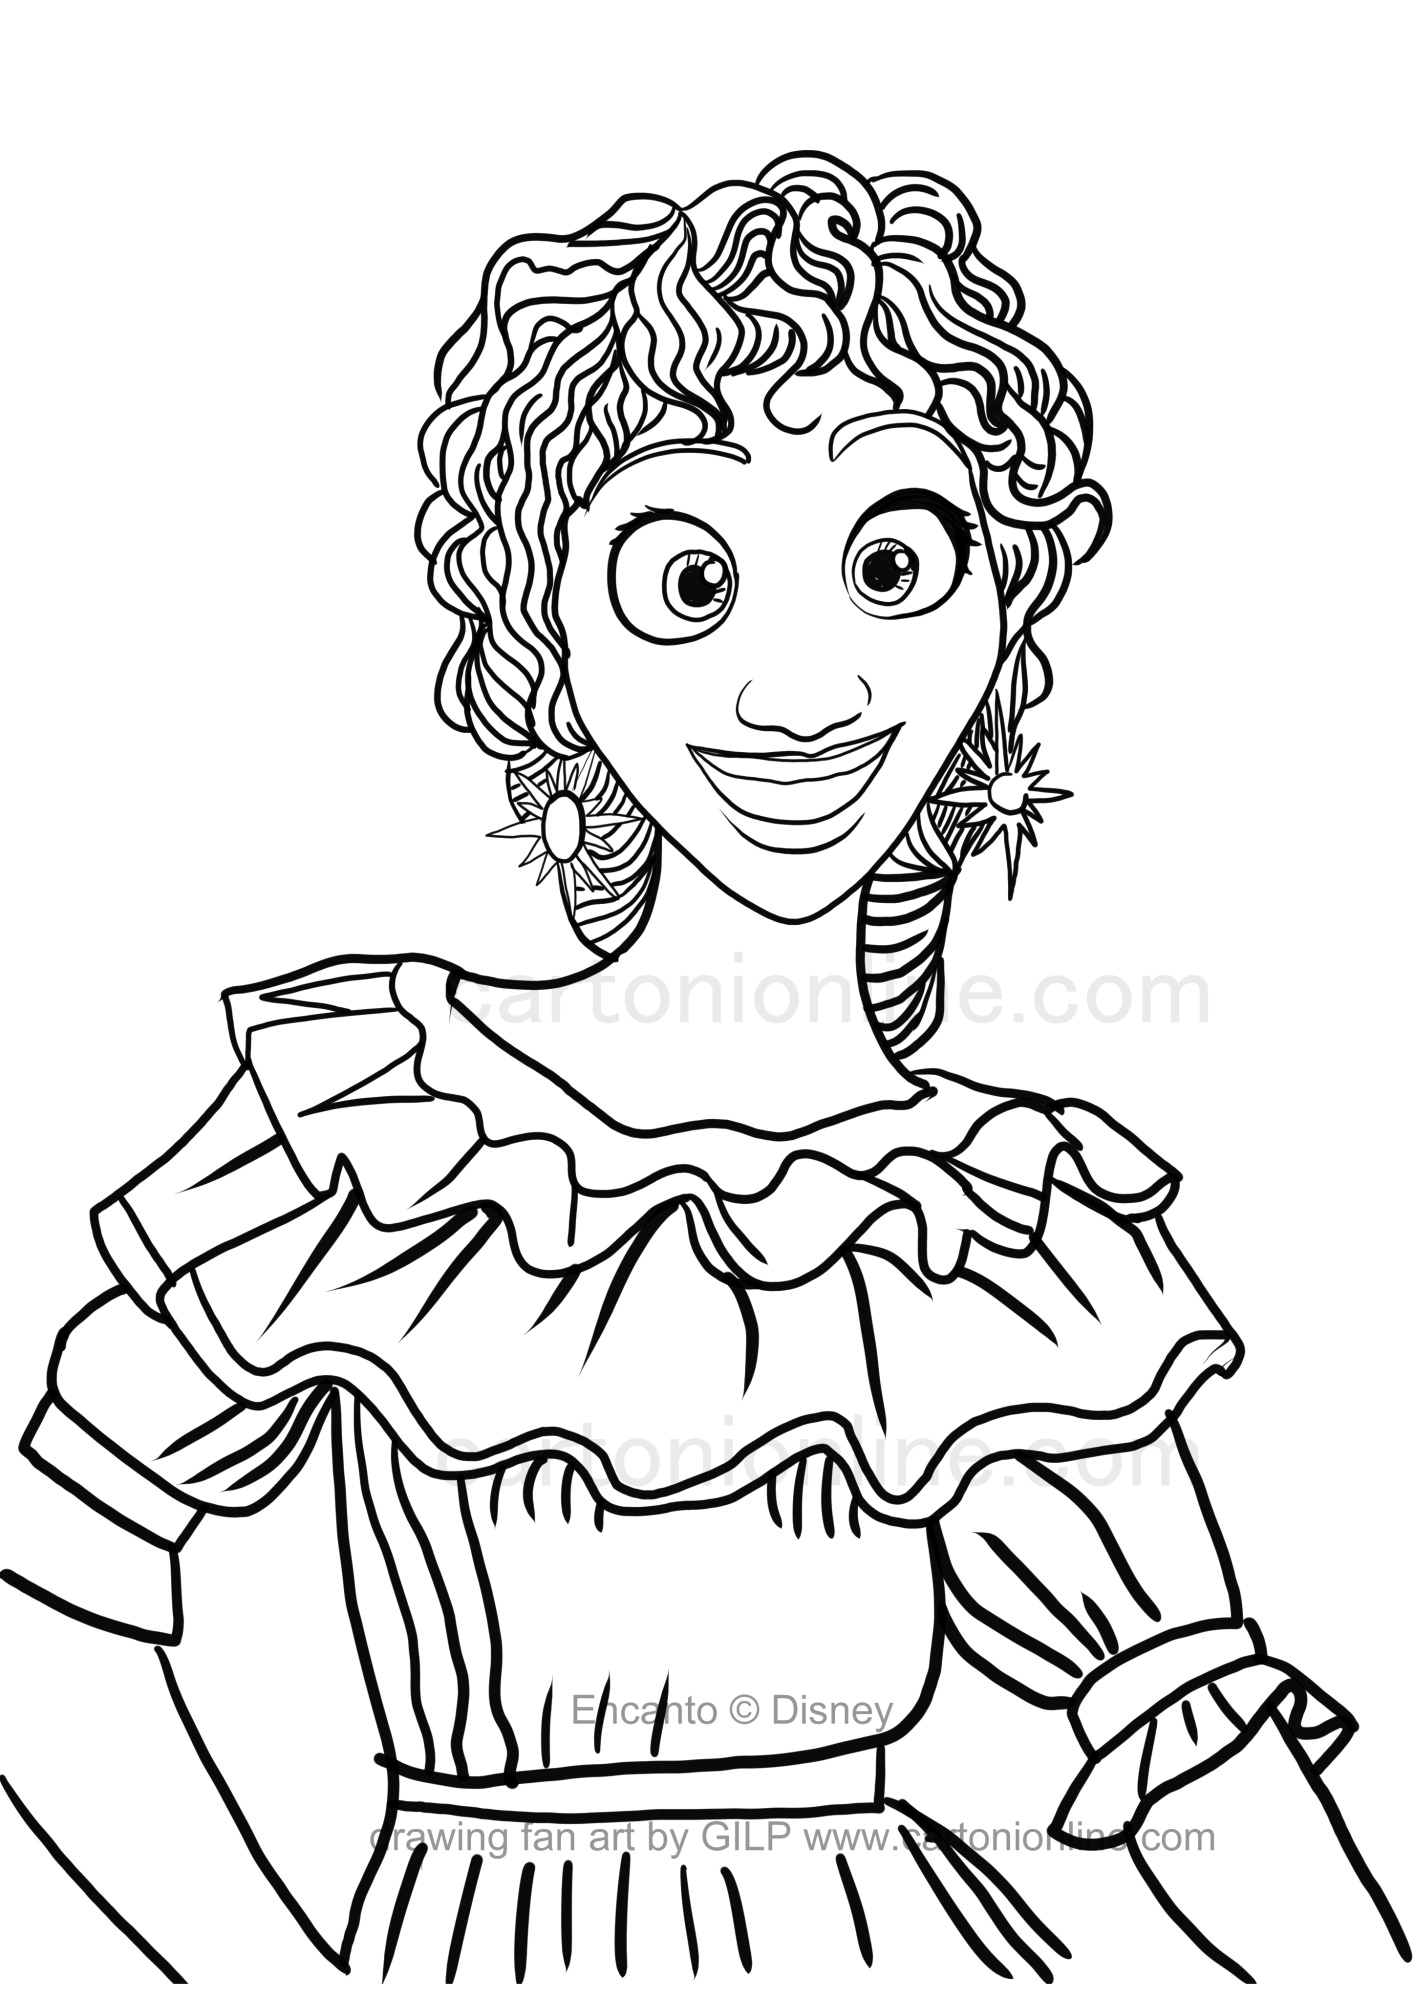 Pepa Madrigal from Encanto coloring page to print and coloring